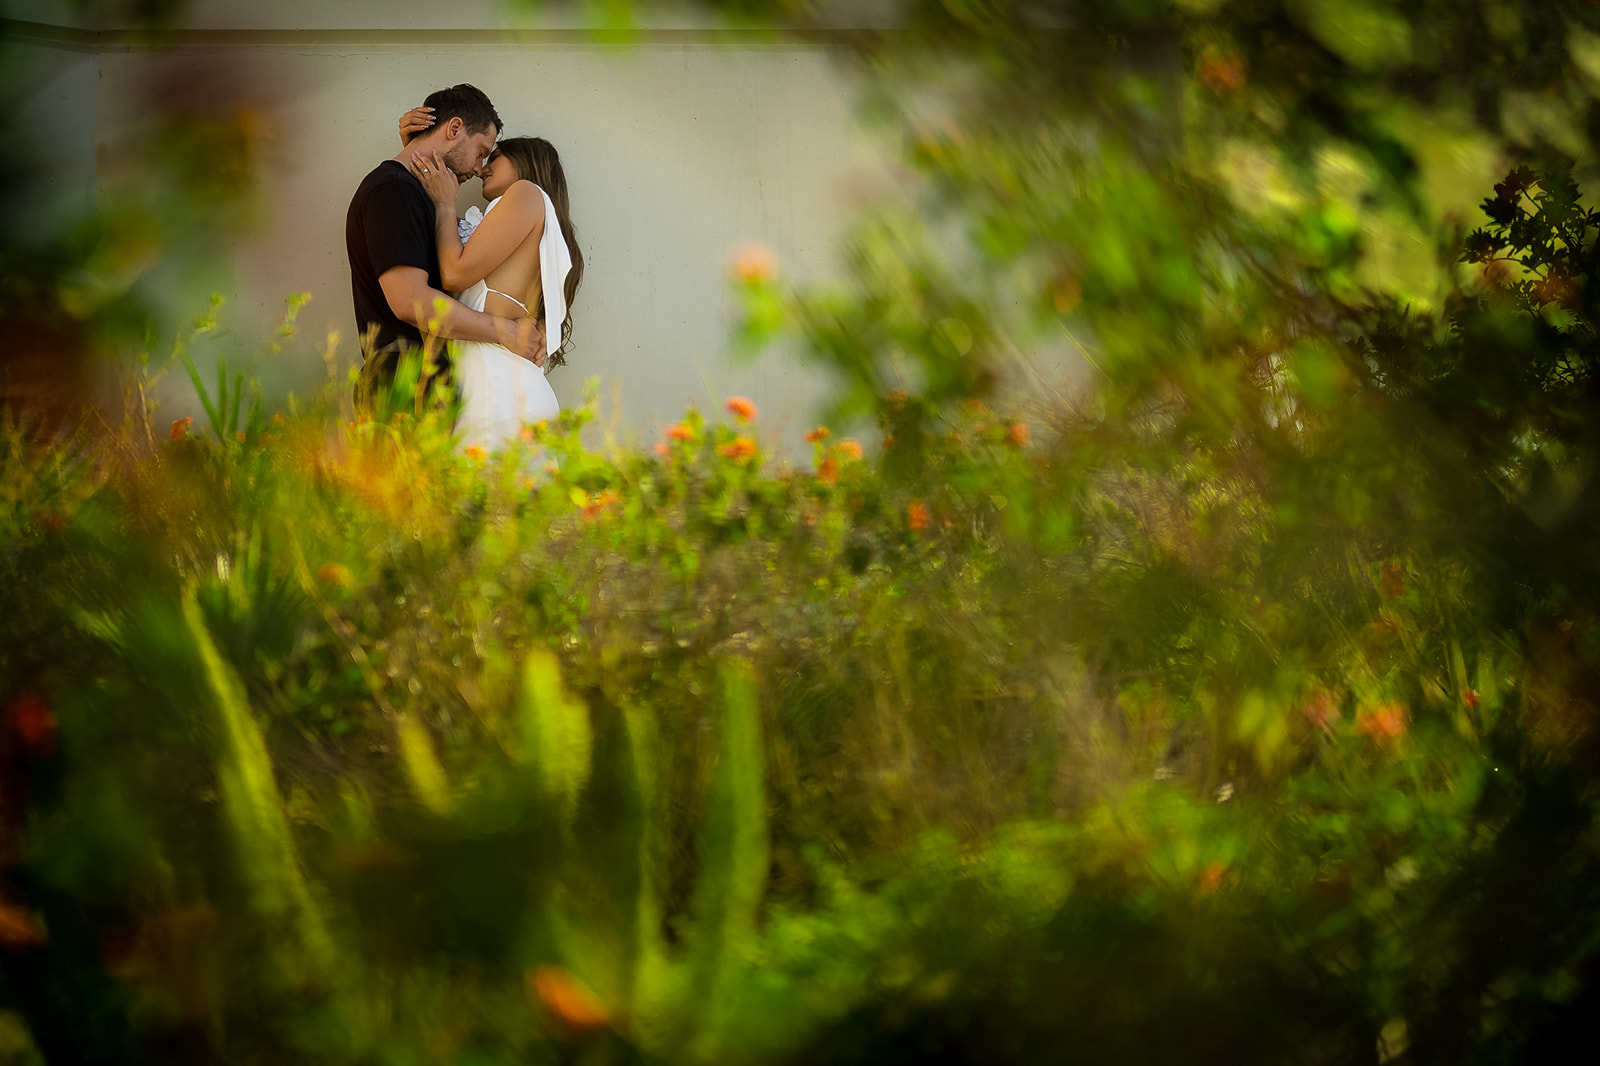 ThomasKim_photography V & J Engagement Session: A couple kissing in a garden.